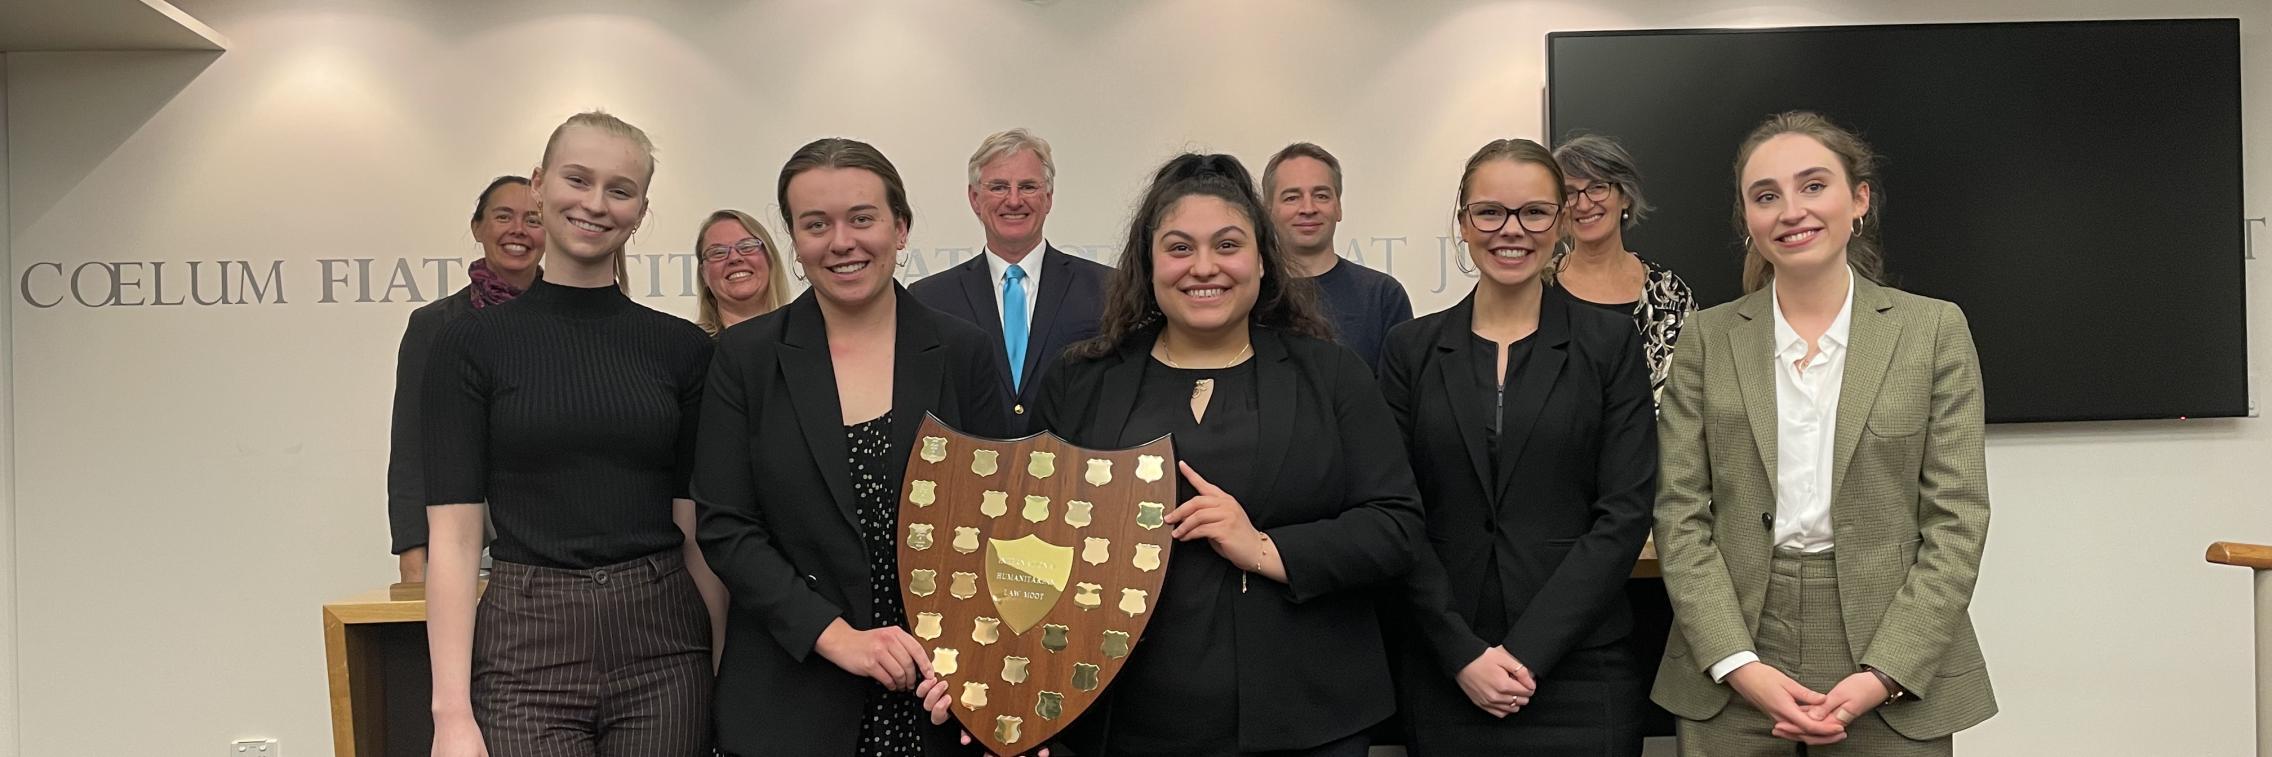 Grand Final Moot takes place at Adelaide Law School